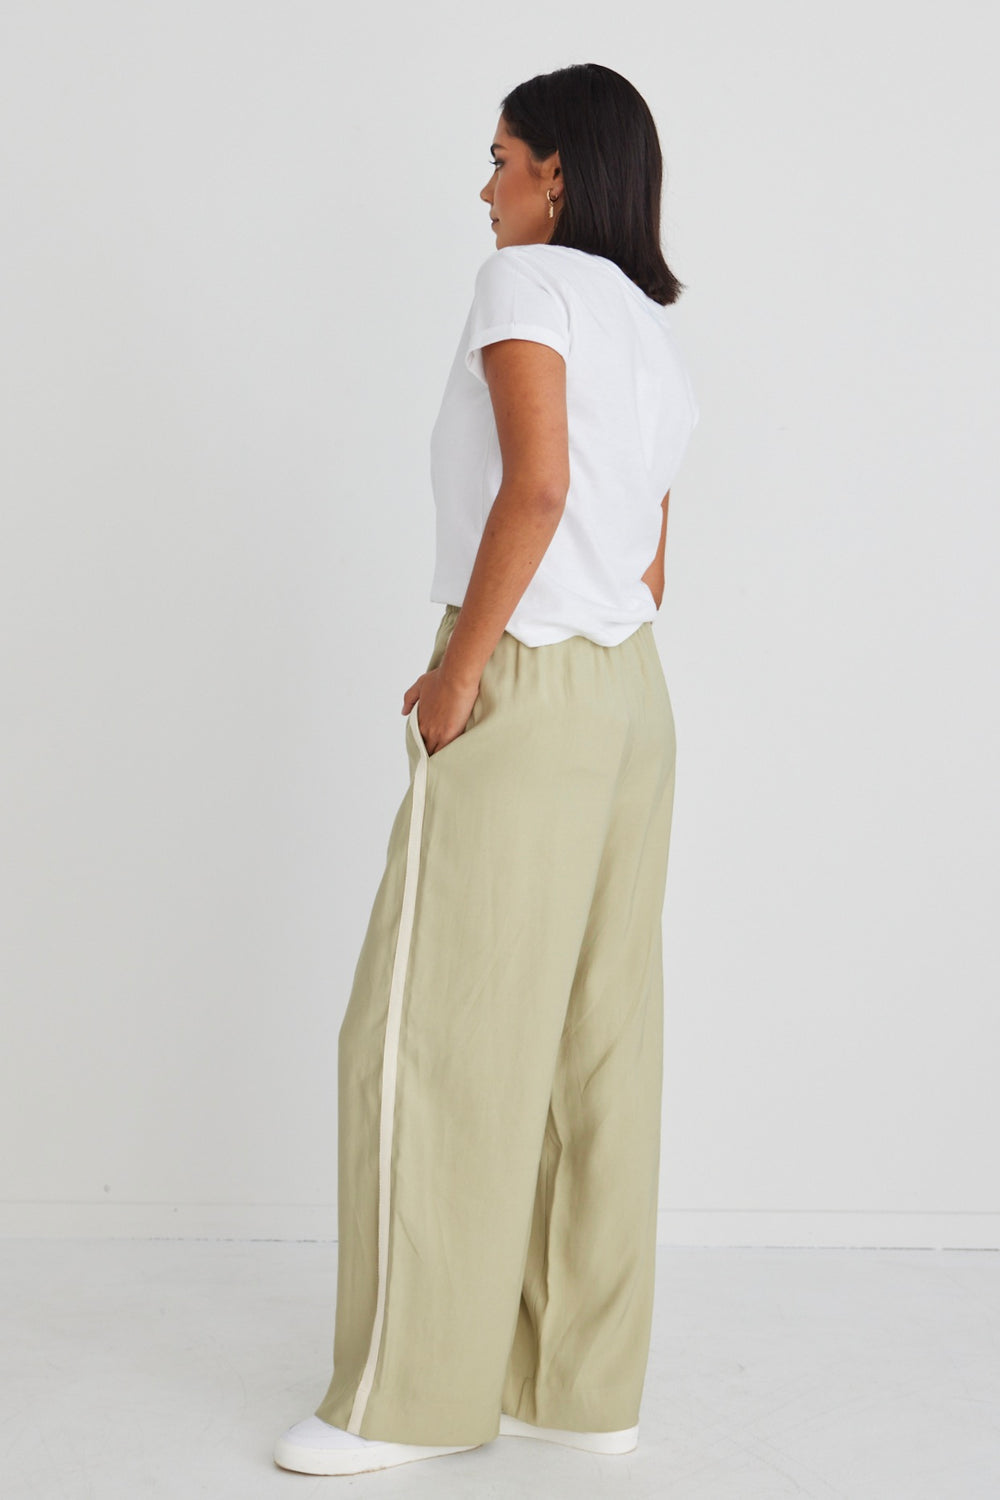 Stories Be Told Townie Pant | Sage